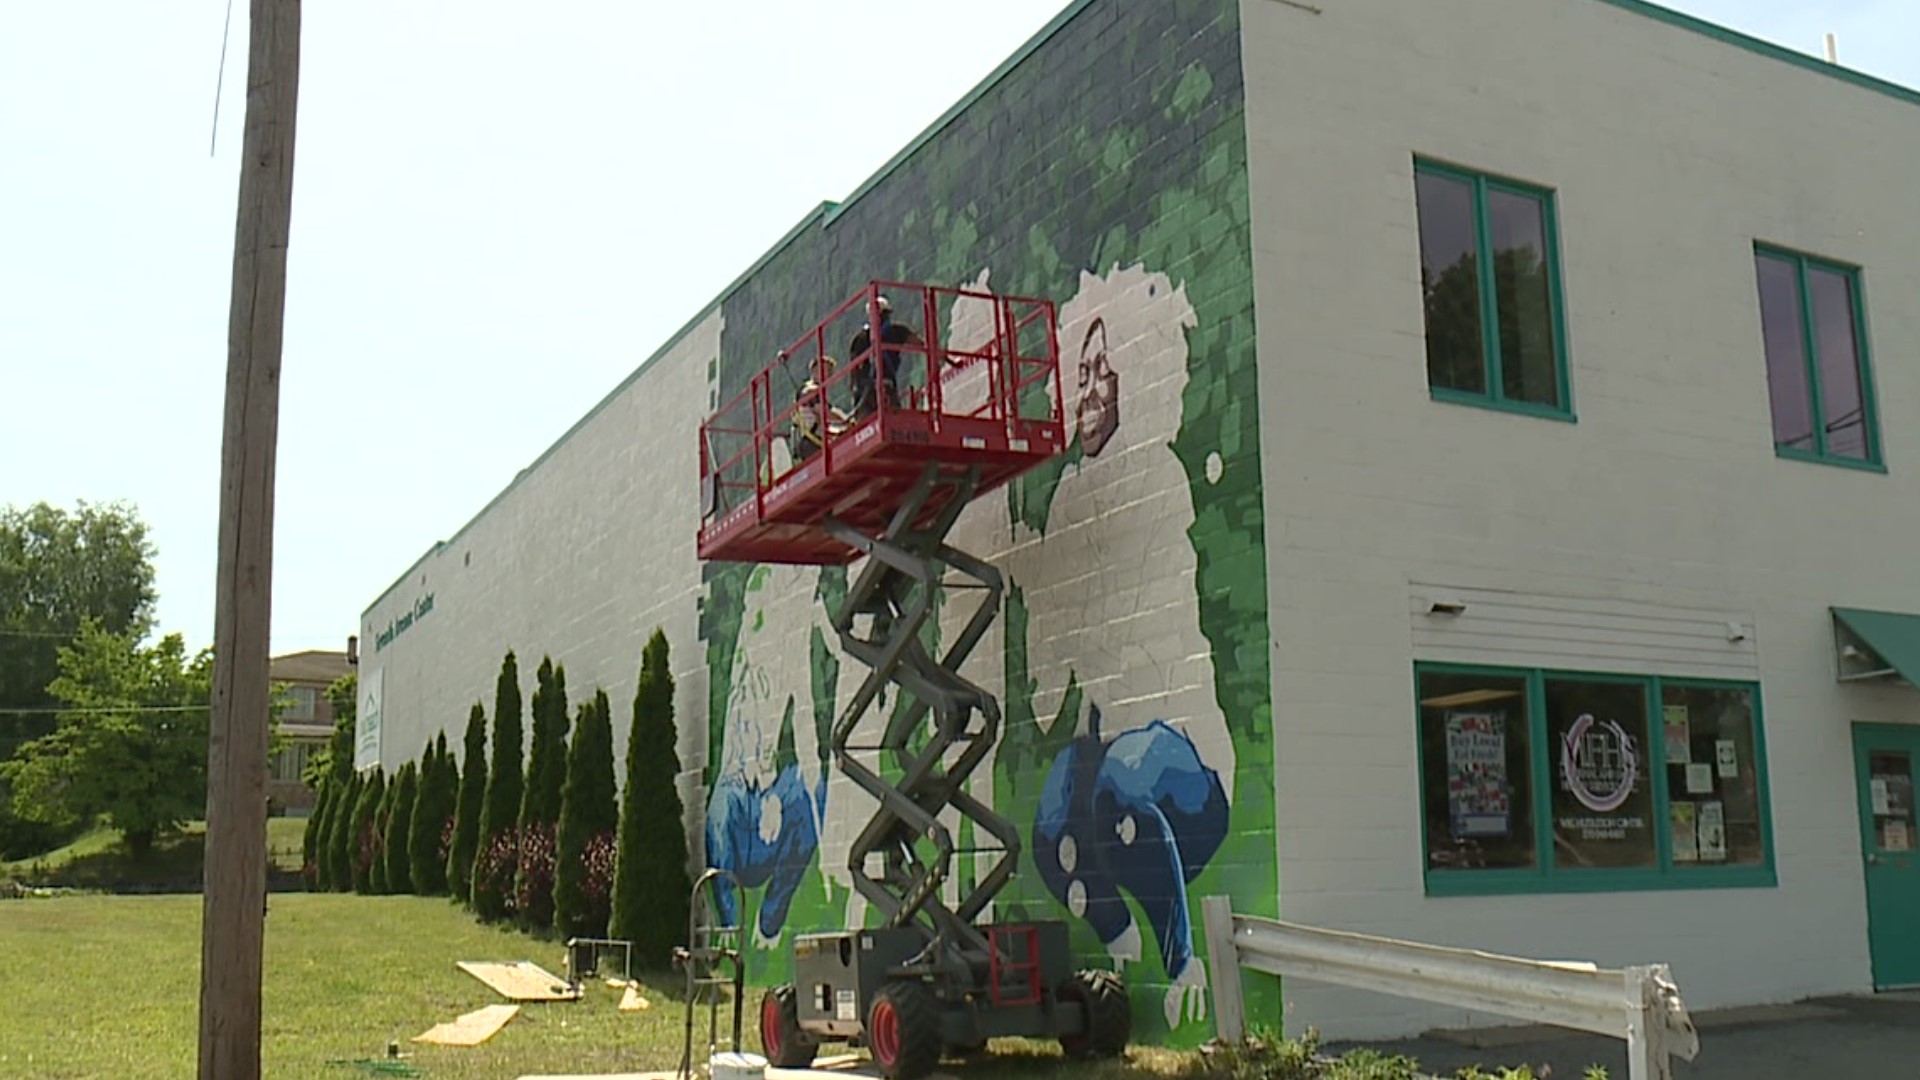 Newswatch 16's Elizabeth Worthington checked out the work in progress and tells us the meaning behind the painting.